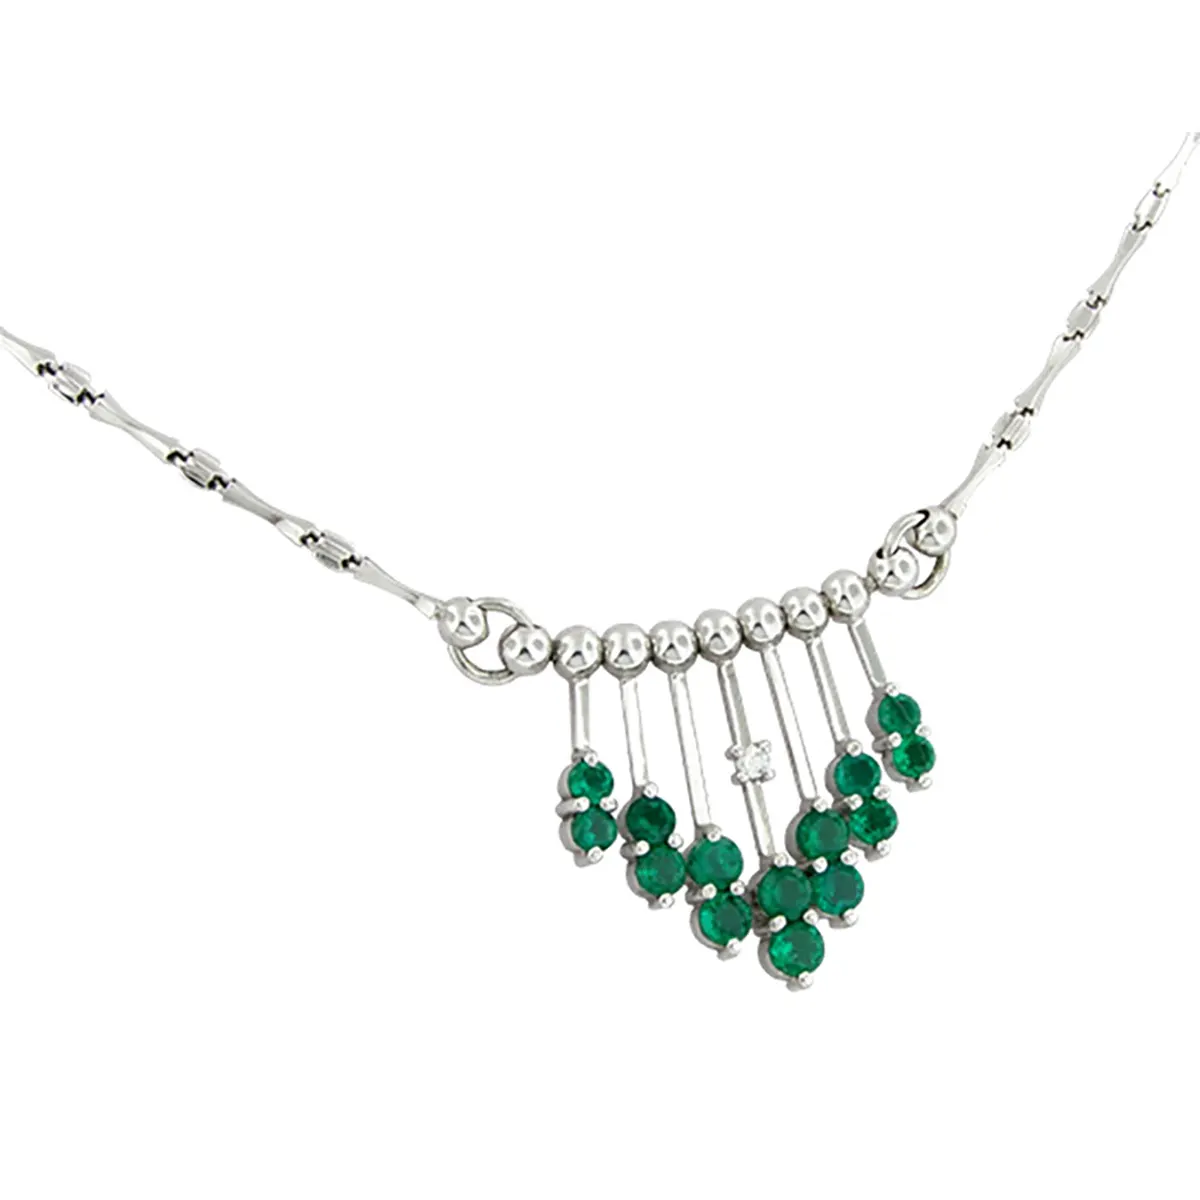 Emerald and Diamond Necklace in 18K White Gold with Round Emeralds and Diamonds